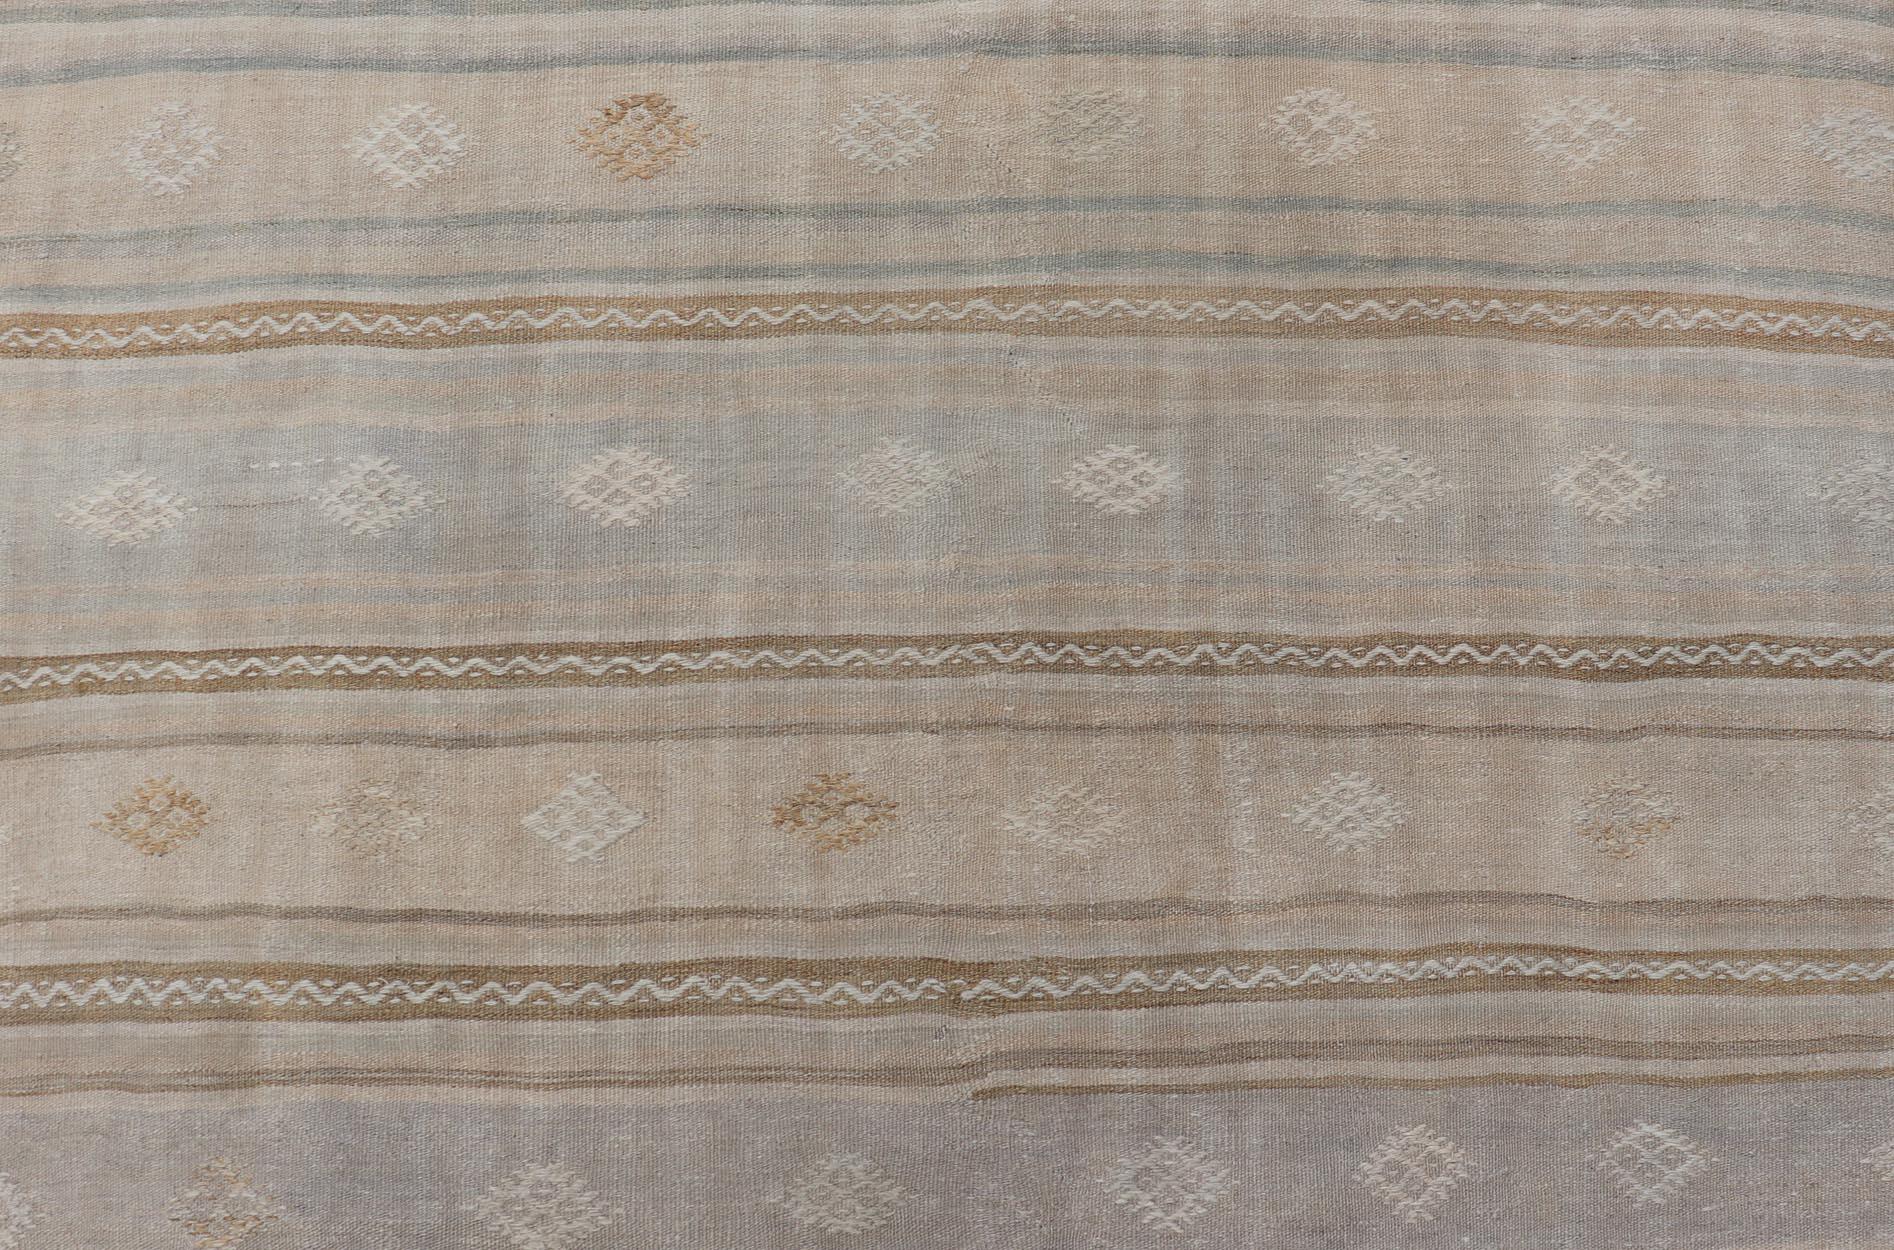 Turkish Flat-Weave Embroideries Kilim in Tan, Taupe, Brown and a Soft Blue For Sale 4